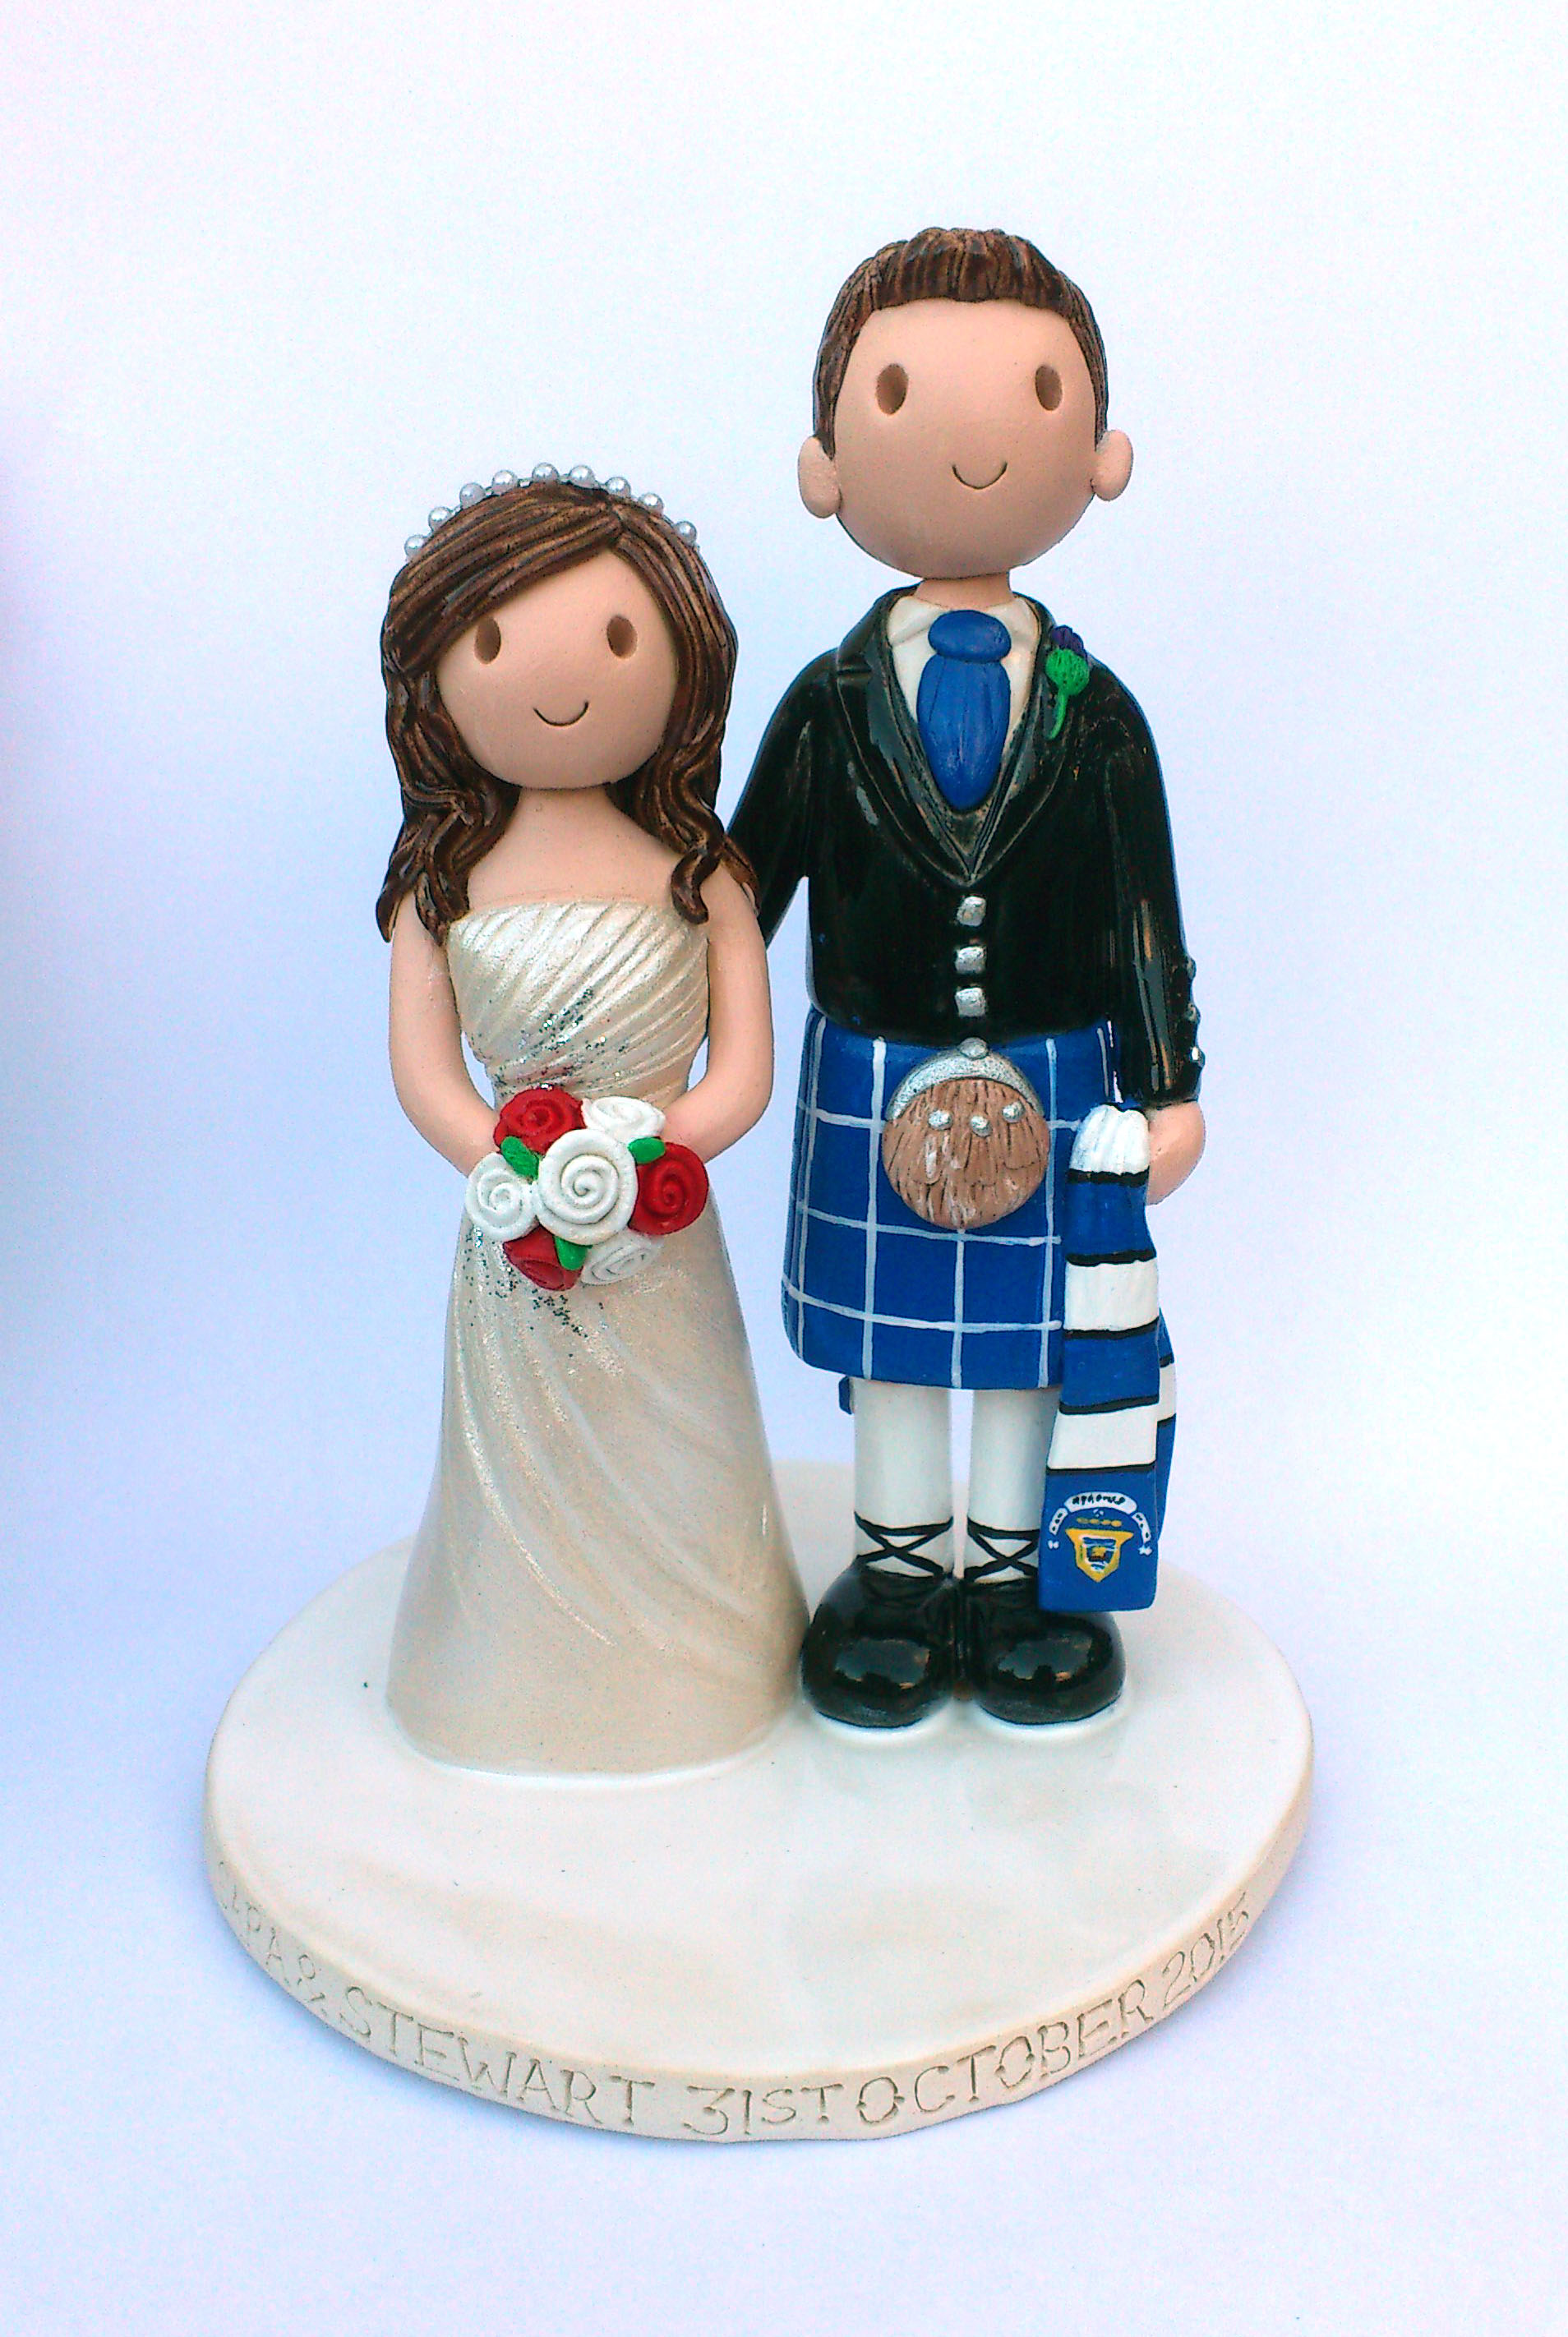 Miniture Wedding Cake Toppers - 31 Unique and Different DESIGN Ideas